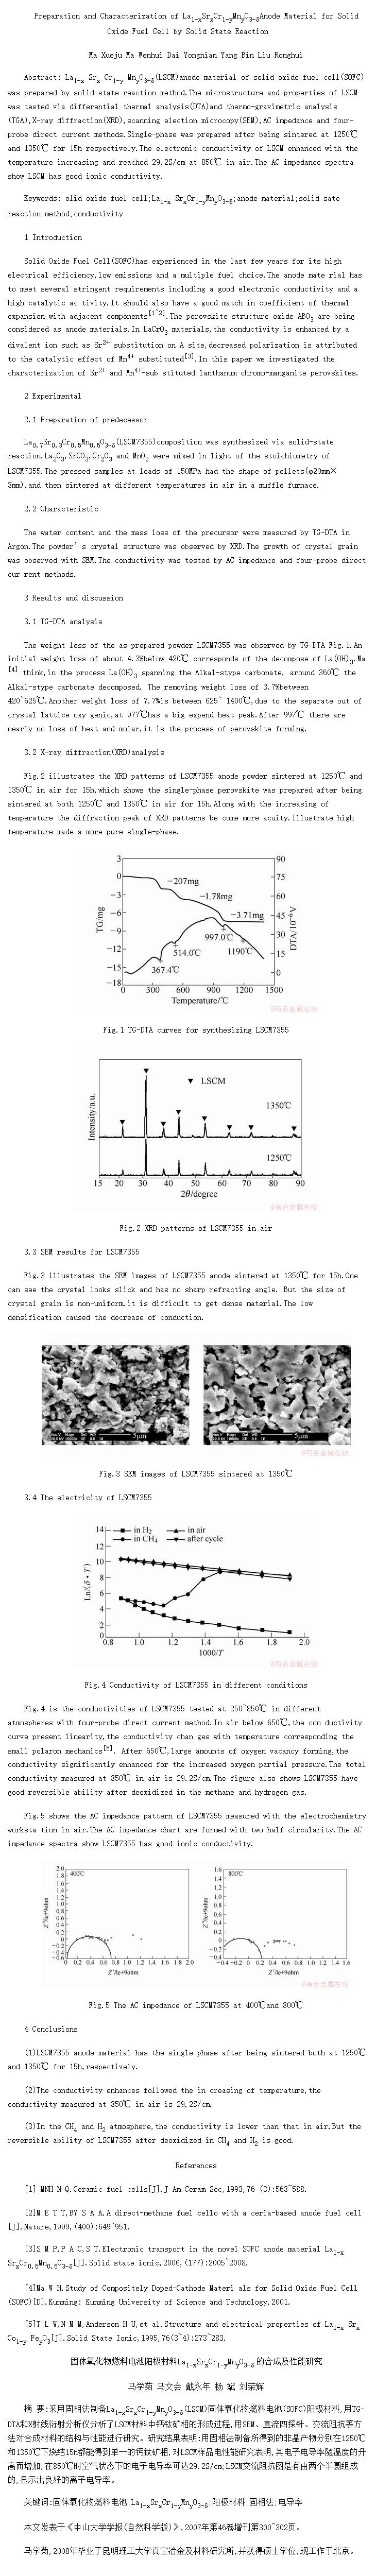 Preparation and Characterization of La<SUB>1-x</SUB>Sr<SUB>x</SUB>Cr<SUB>1-y</SUB>Mn<SUB>y</SUB>O<SUB>3-</SUB>Anode Material for Solid Oxide Fuel Cell by Solid State Reaction